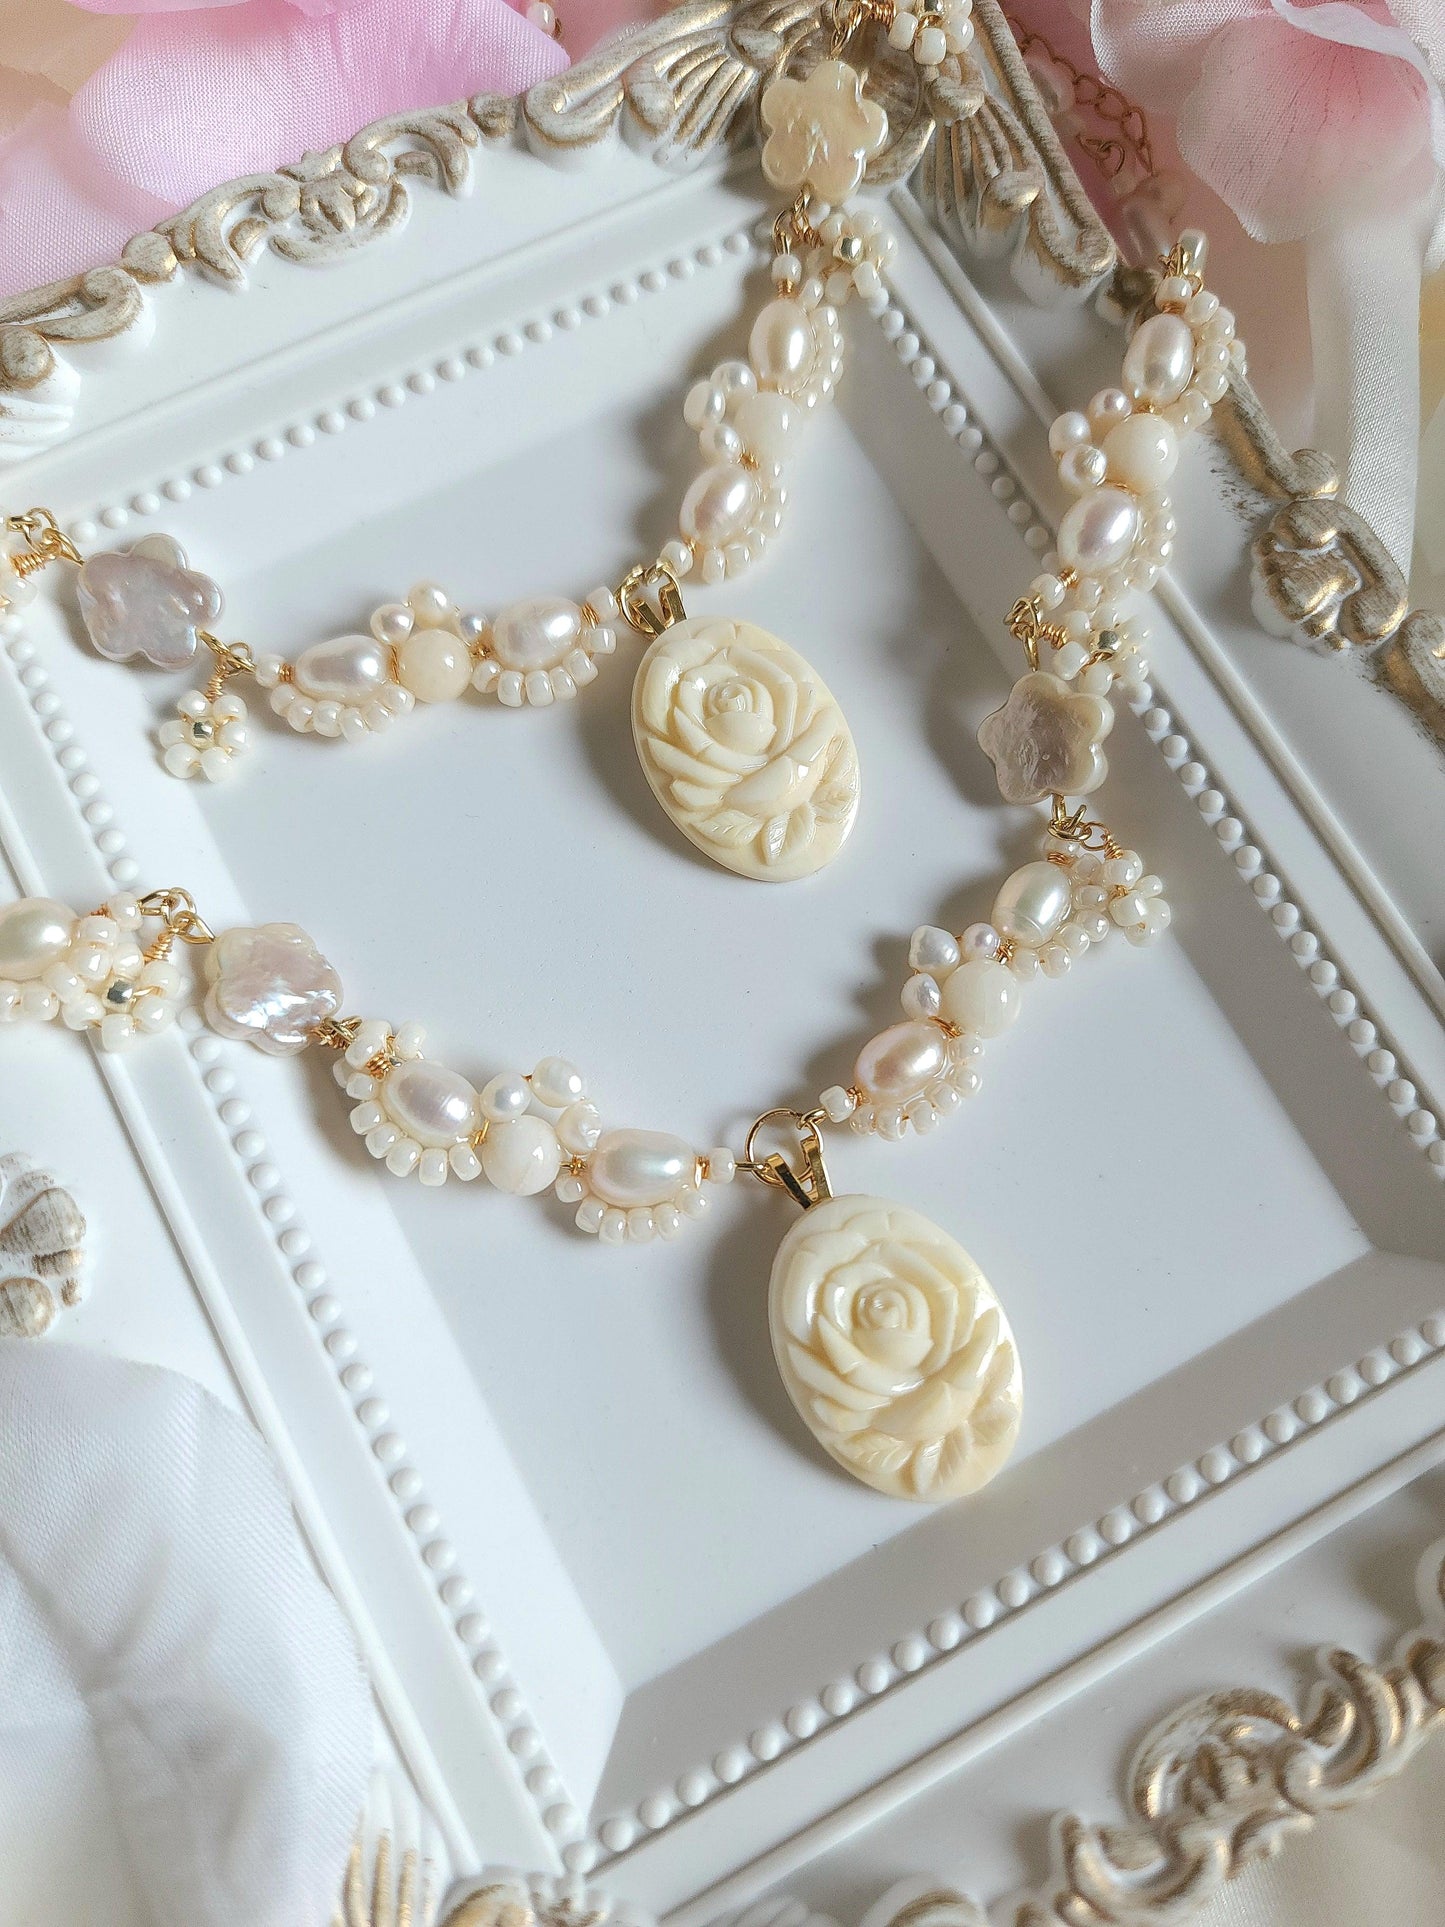 Carved Ivory Rose Necklace - By Cocoyu